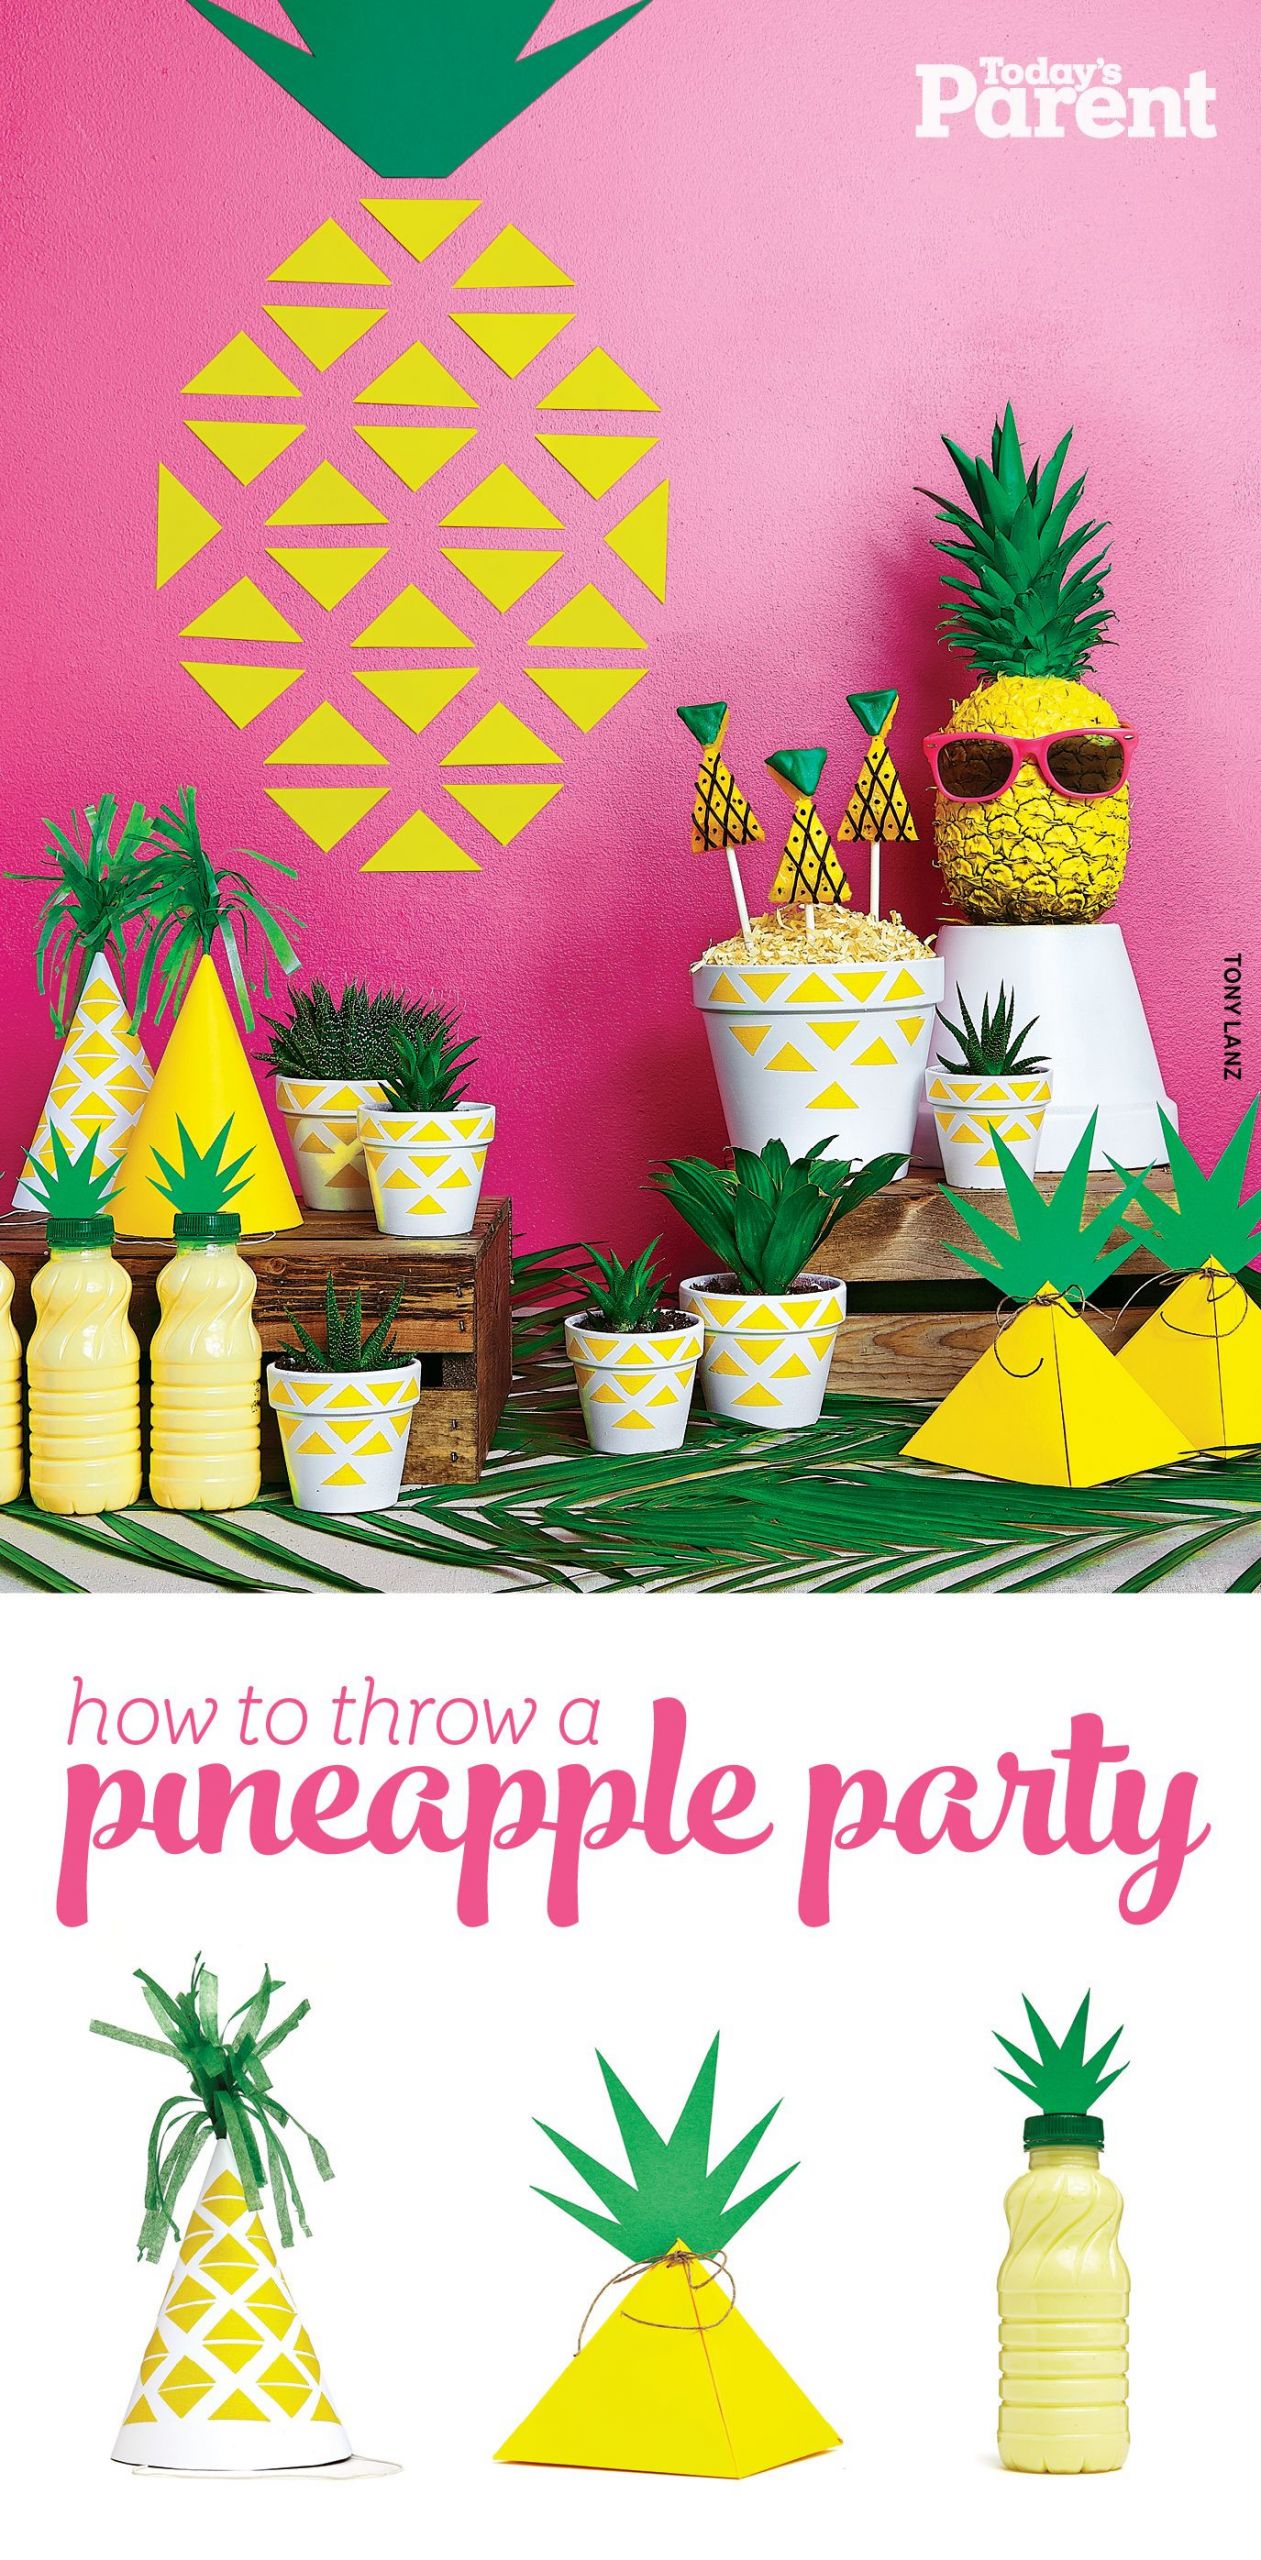 Summer Theme Party Ideas
 How to throw a pineapple party